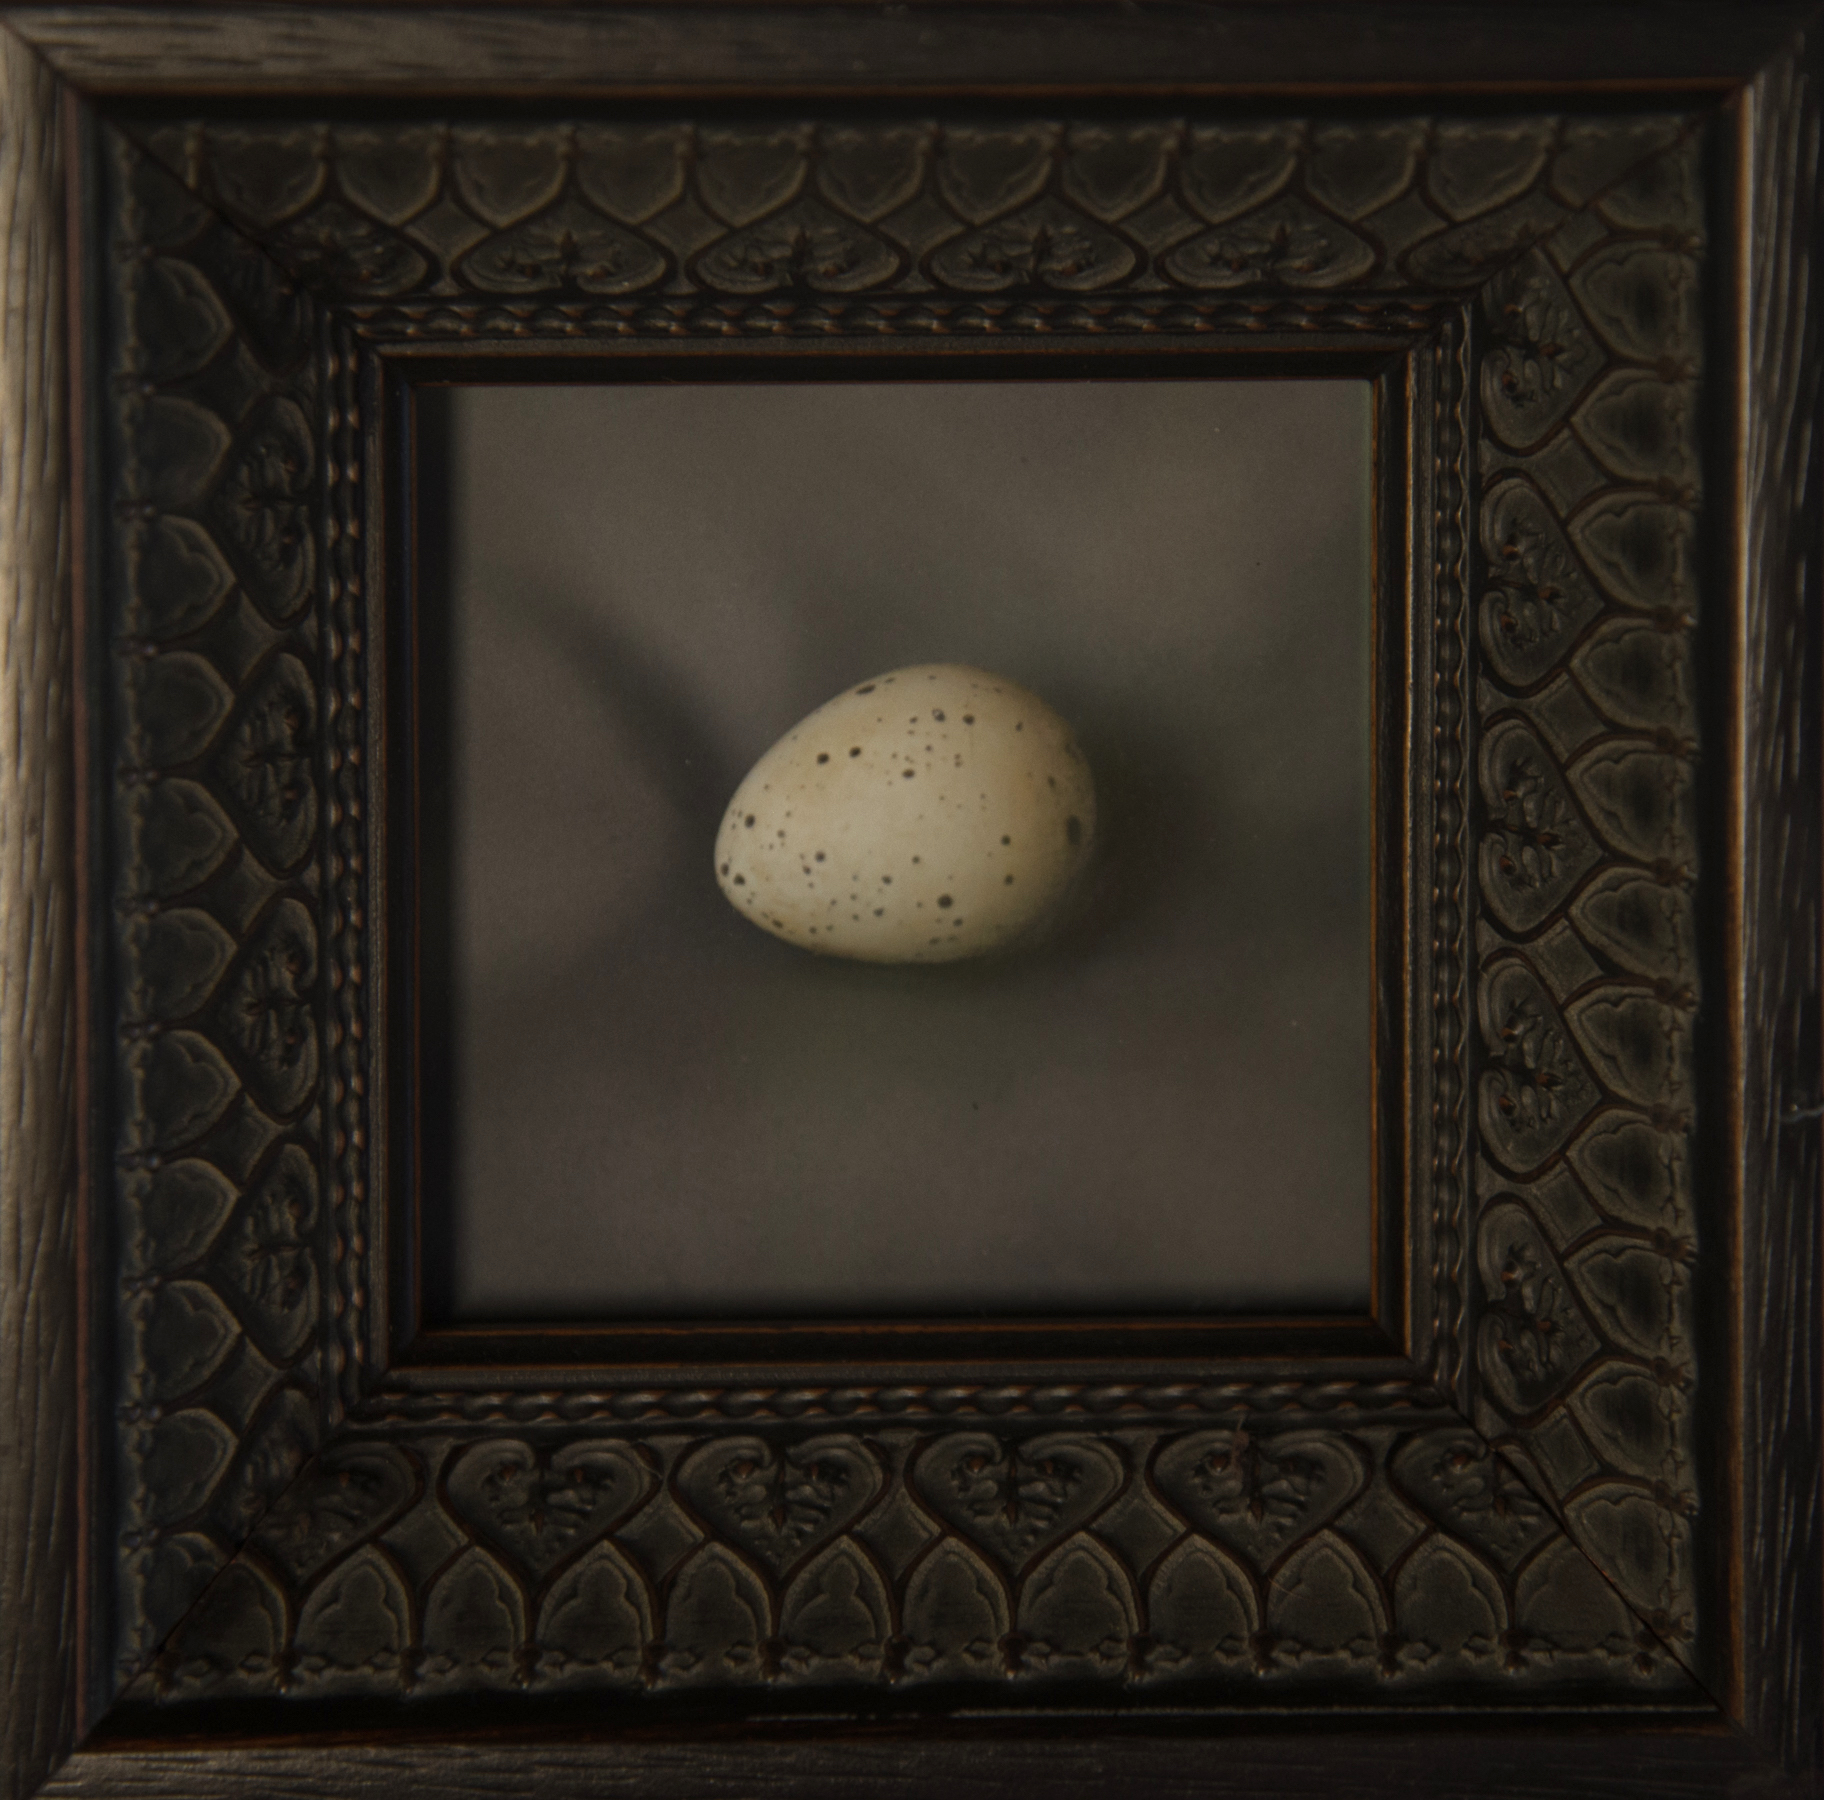 Kate Breakey, Quail Egg 21, Catherine Couturier Gallery